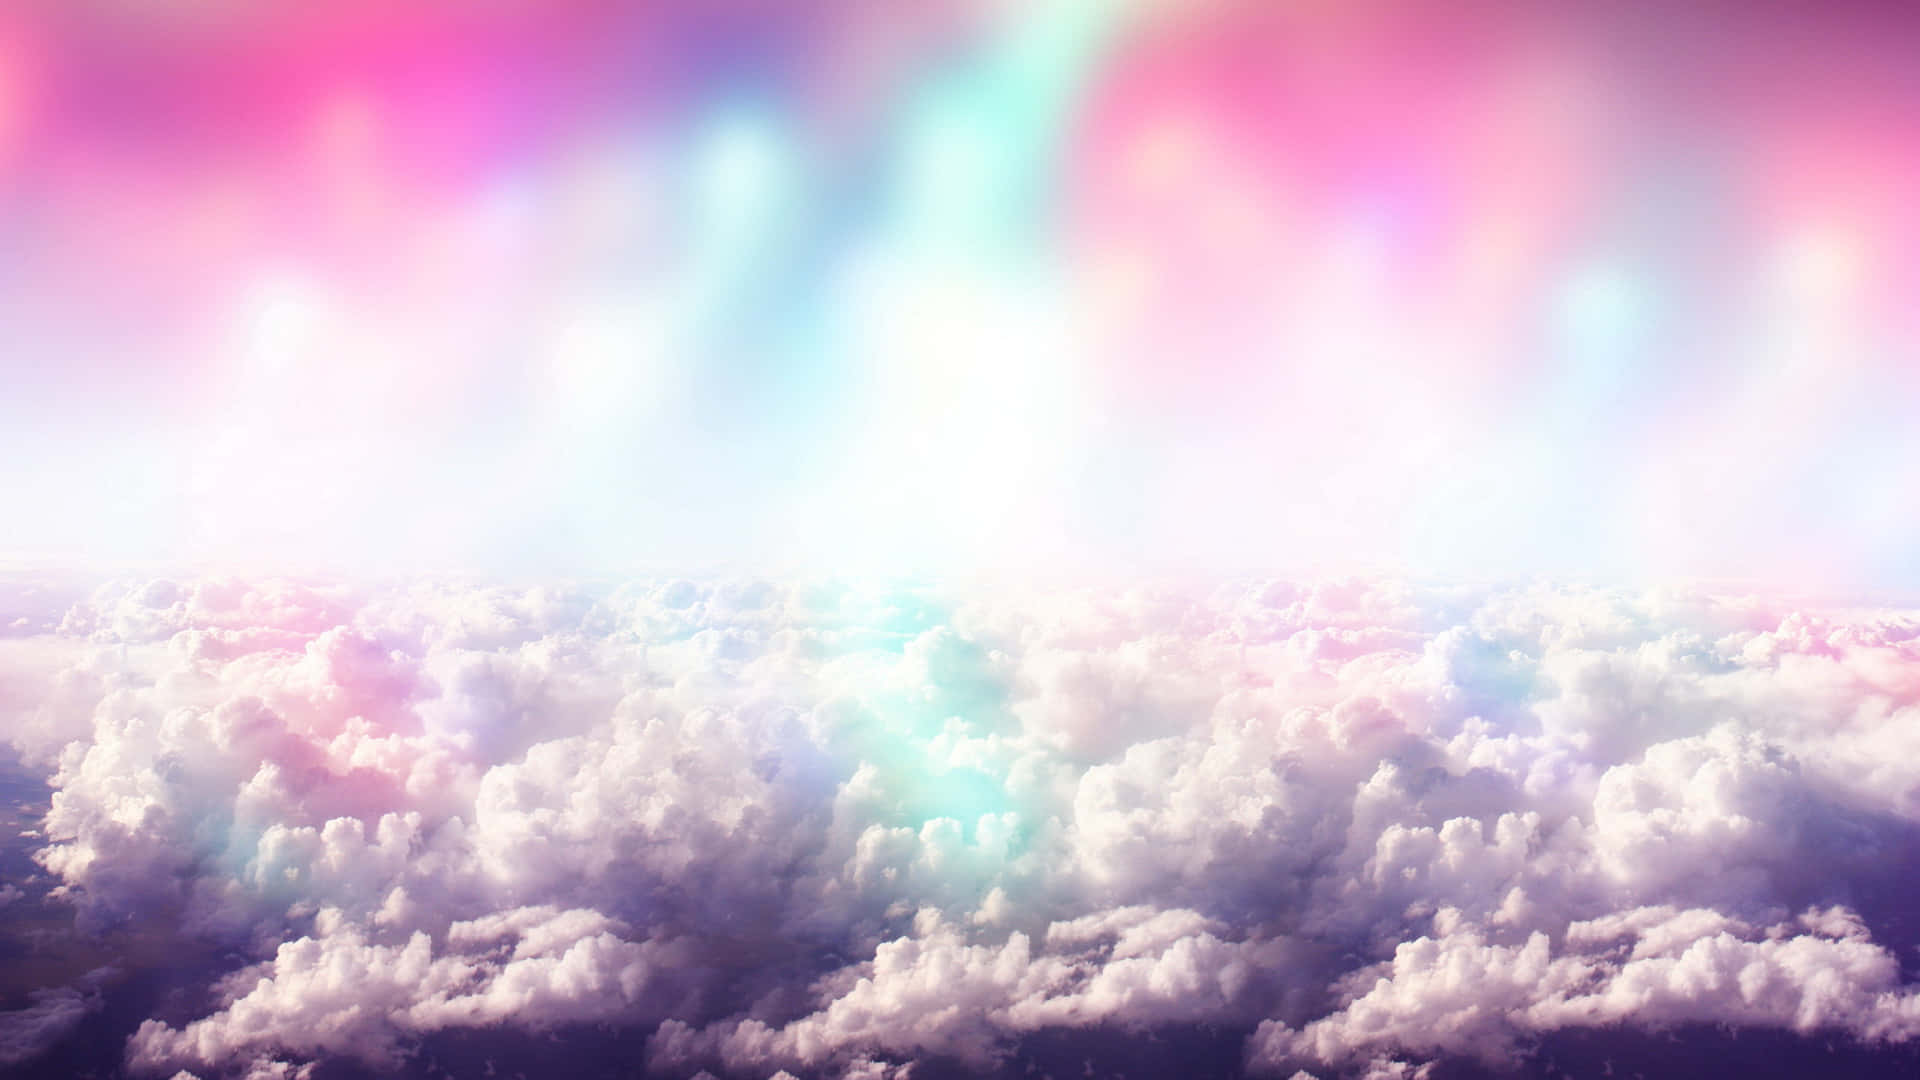 Trippy Aesthetic Clouds With Bright Lights Wallpaper